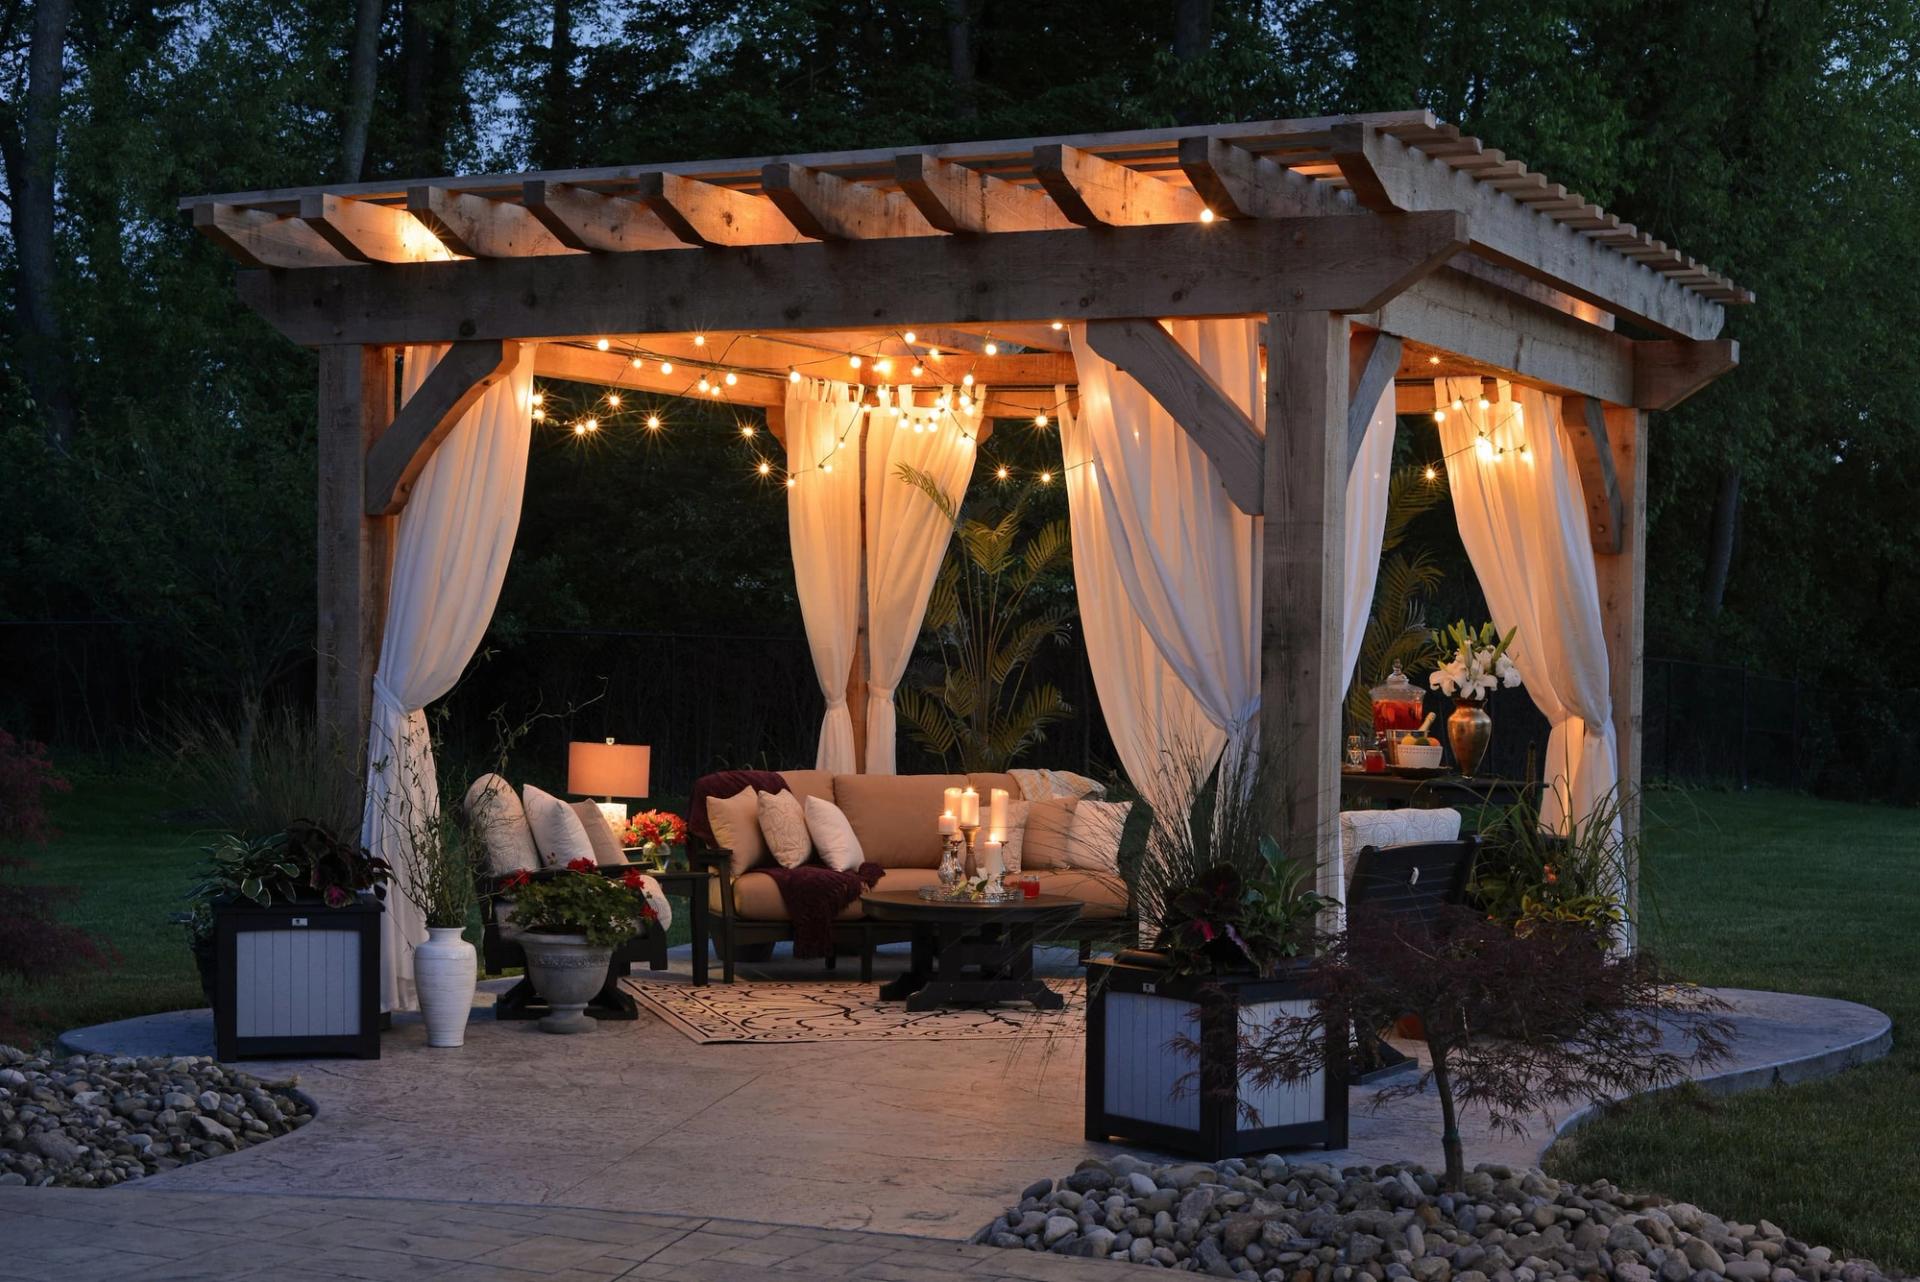 A nicely decorated patio at night with Patio Life furniture